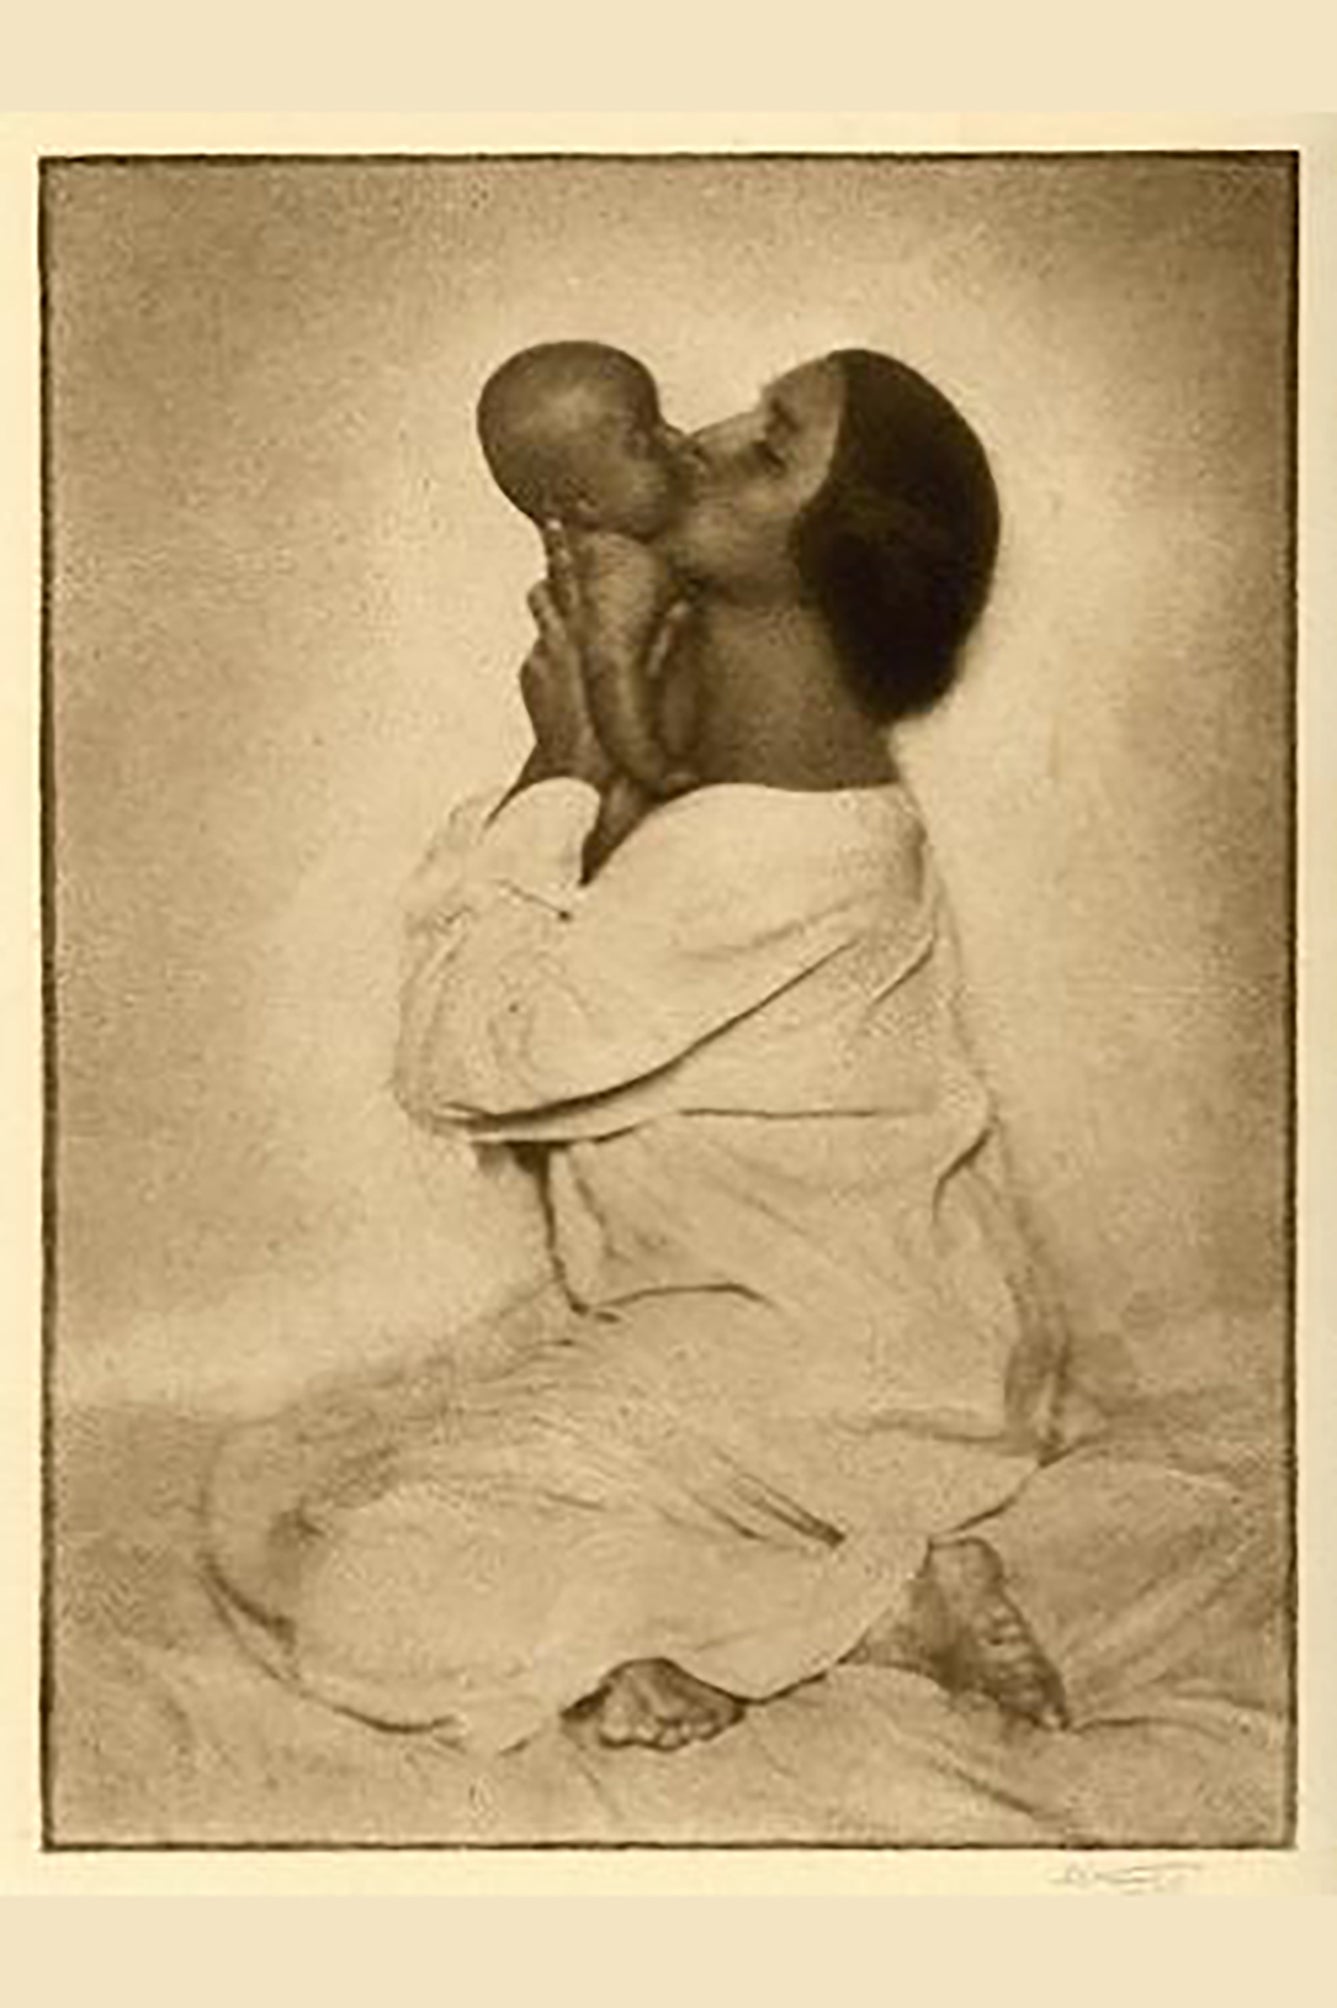 Mother and Child by Rudolph Koppitz, 1925 - Postcard